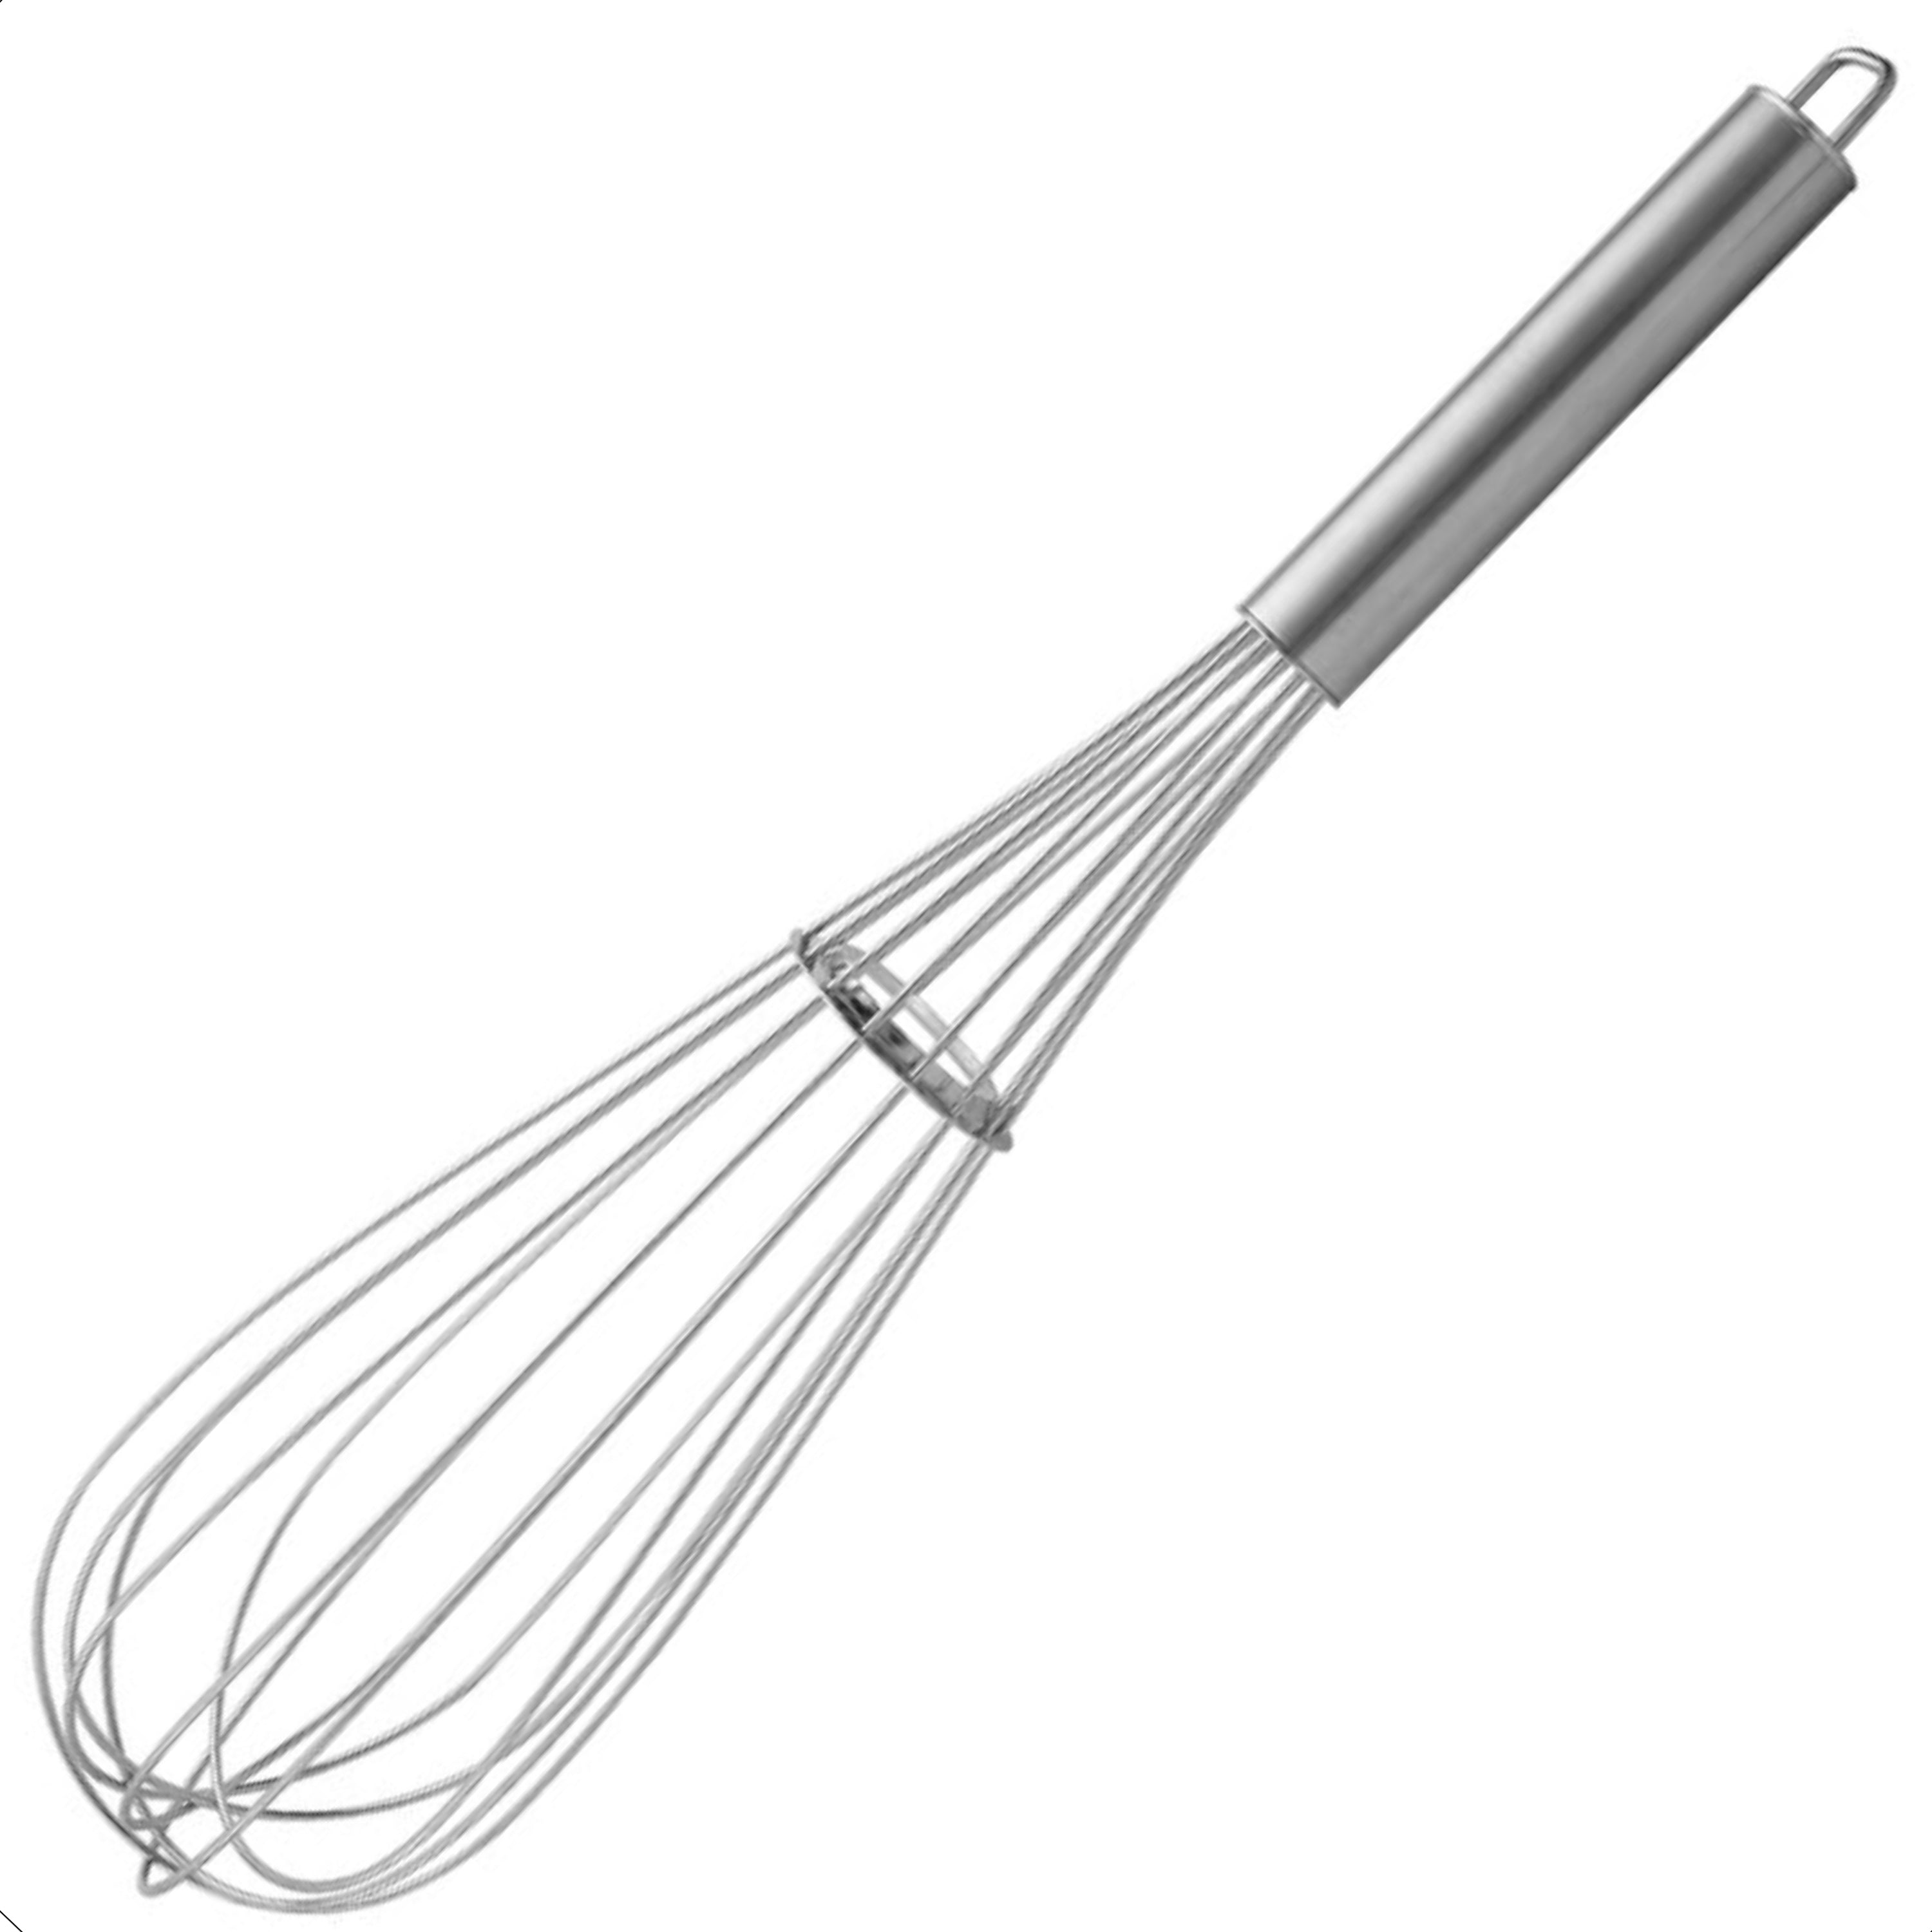 KOWS Pipe handle 2.0mm whisk 30 cm(WK0016)